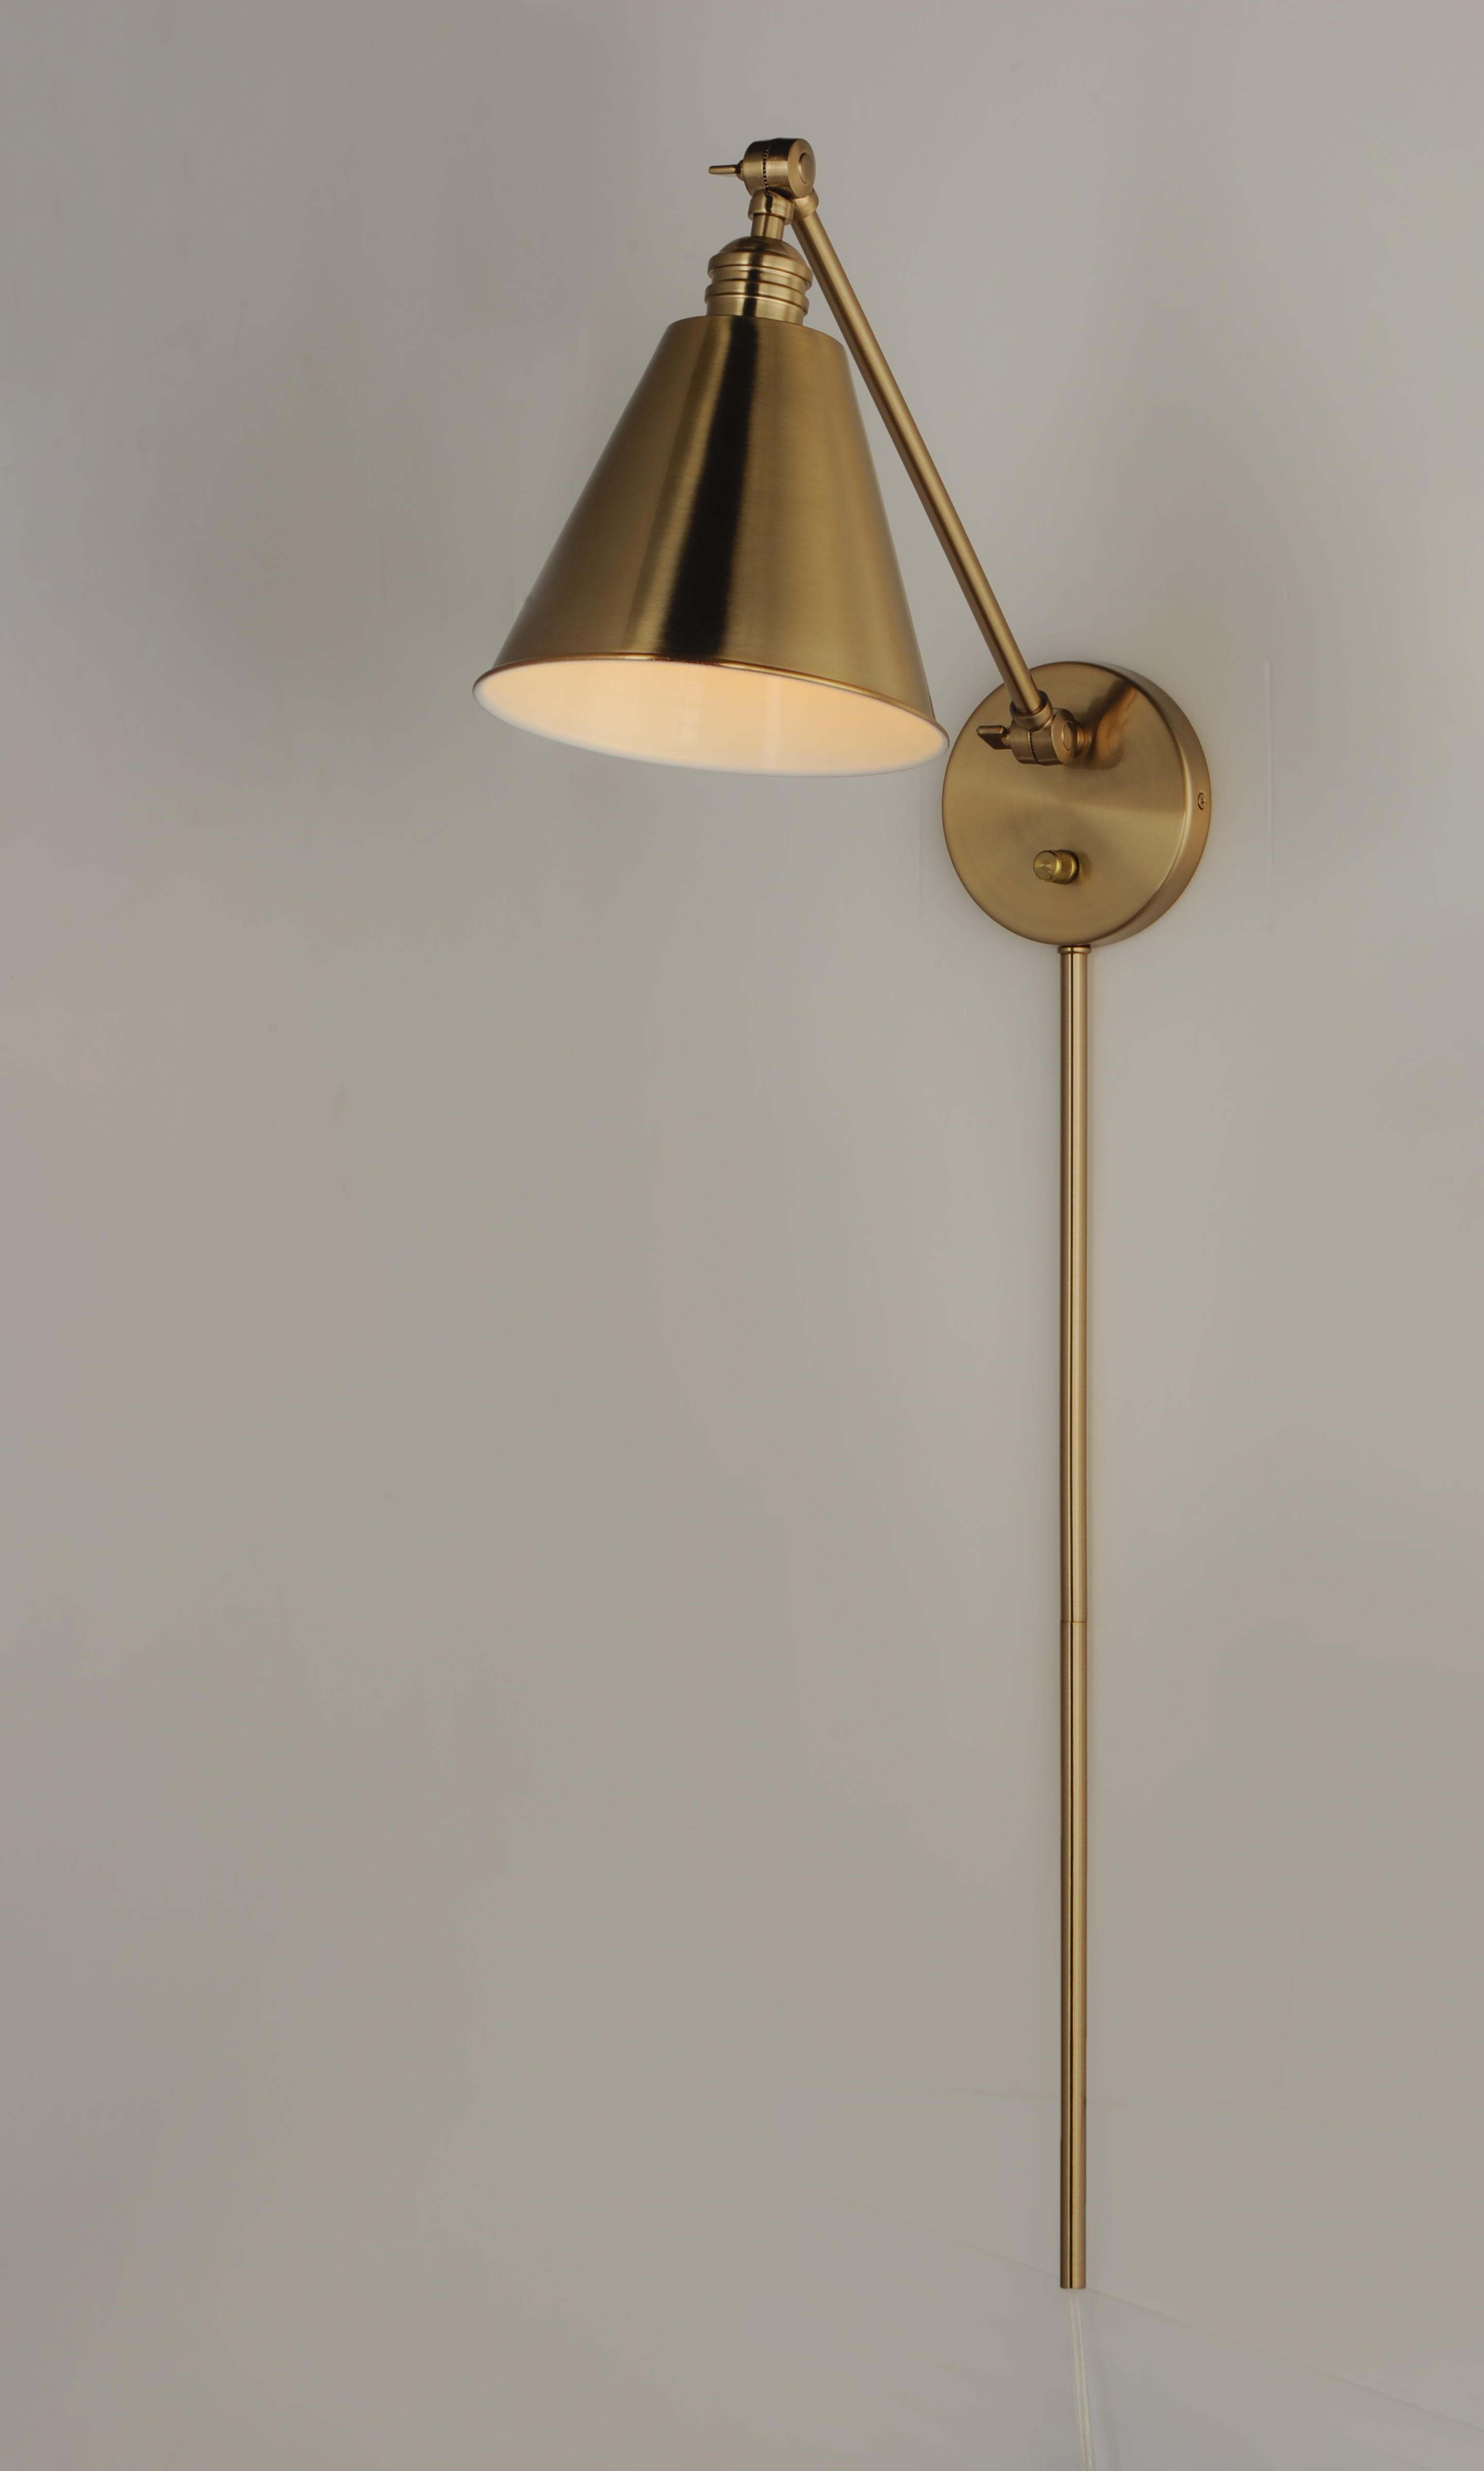 Library Wall Sconce - Wall Sconce - Maxim Lighting